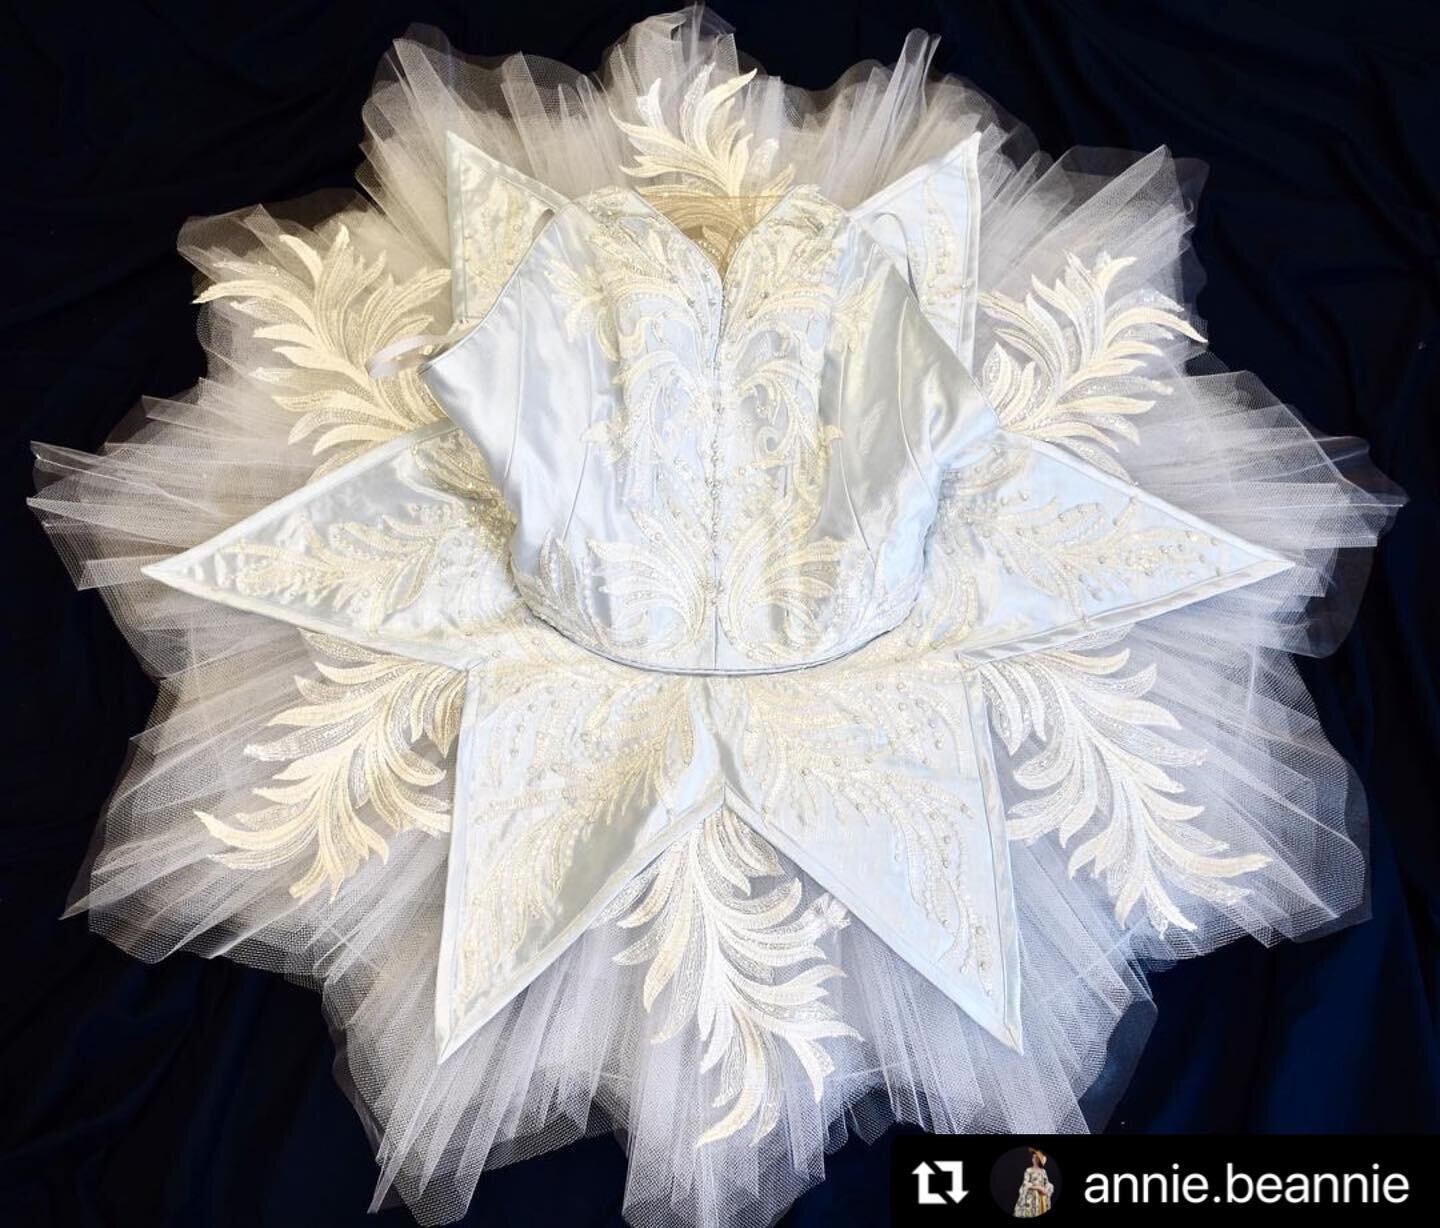 More of this stunning tutu. 😌🤍
Six more performances of The Watchmaker&rsquo;s Song this weekend, Thursday-Saturday 12/16-18, 6:30 and 8:30p! ✨✨✨ Tix at bit.ly/WatchmakerSongTix2021

#Repost @annie.beannie 
・・・
❄️ The Snow Queen ❄️
So pleased to ha